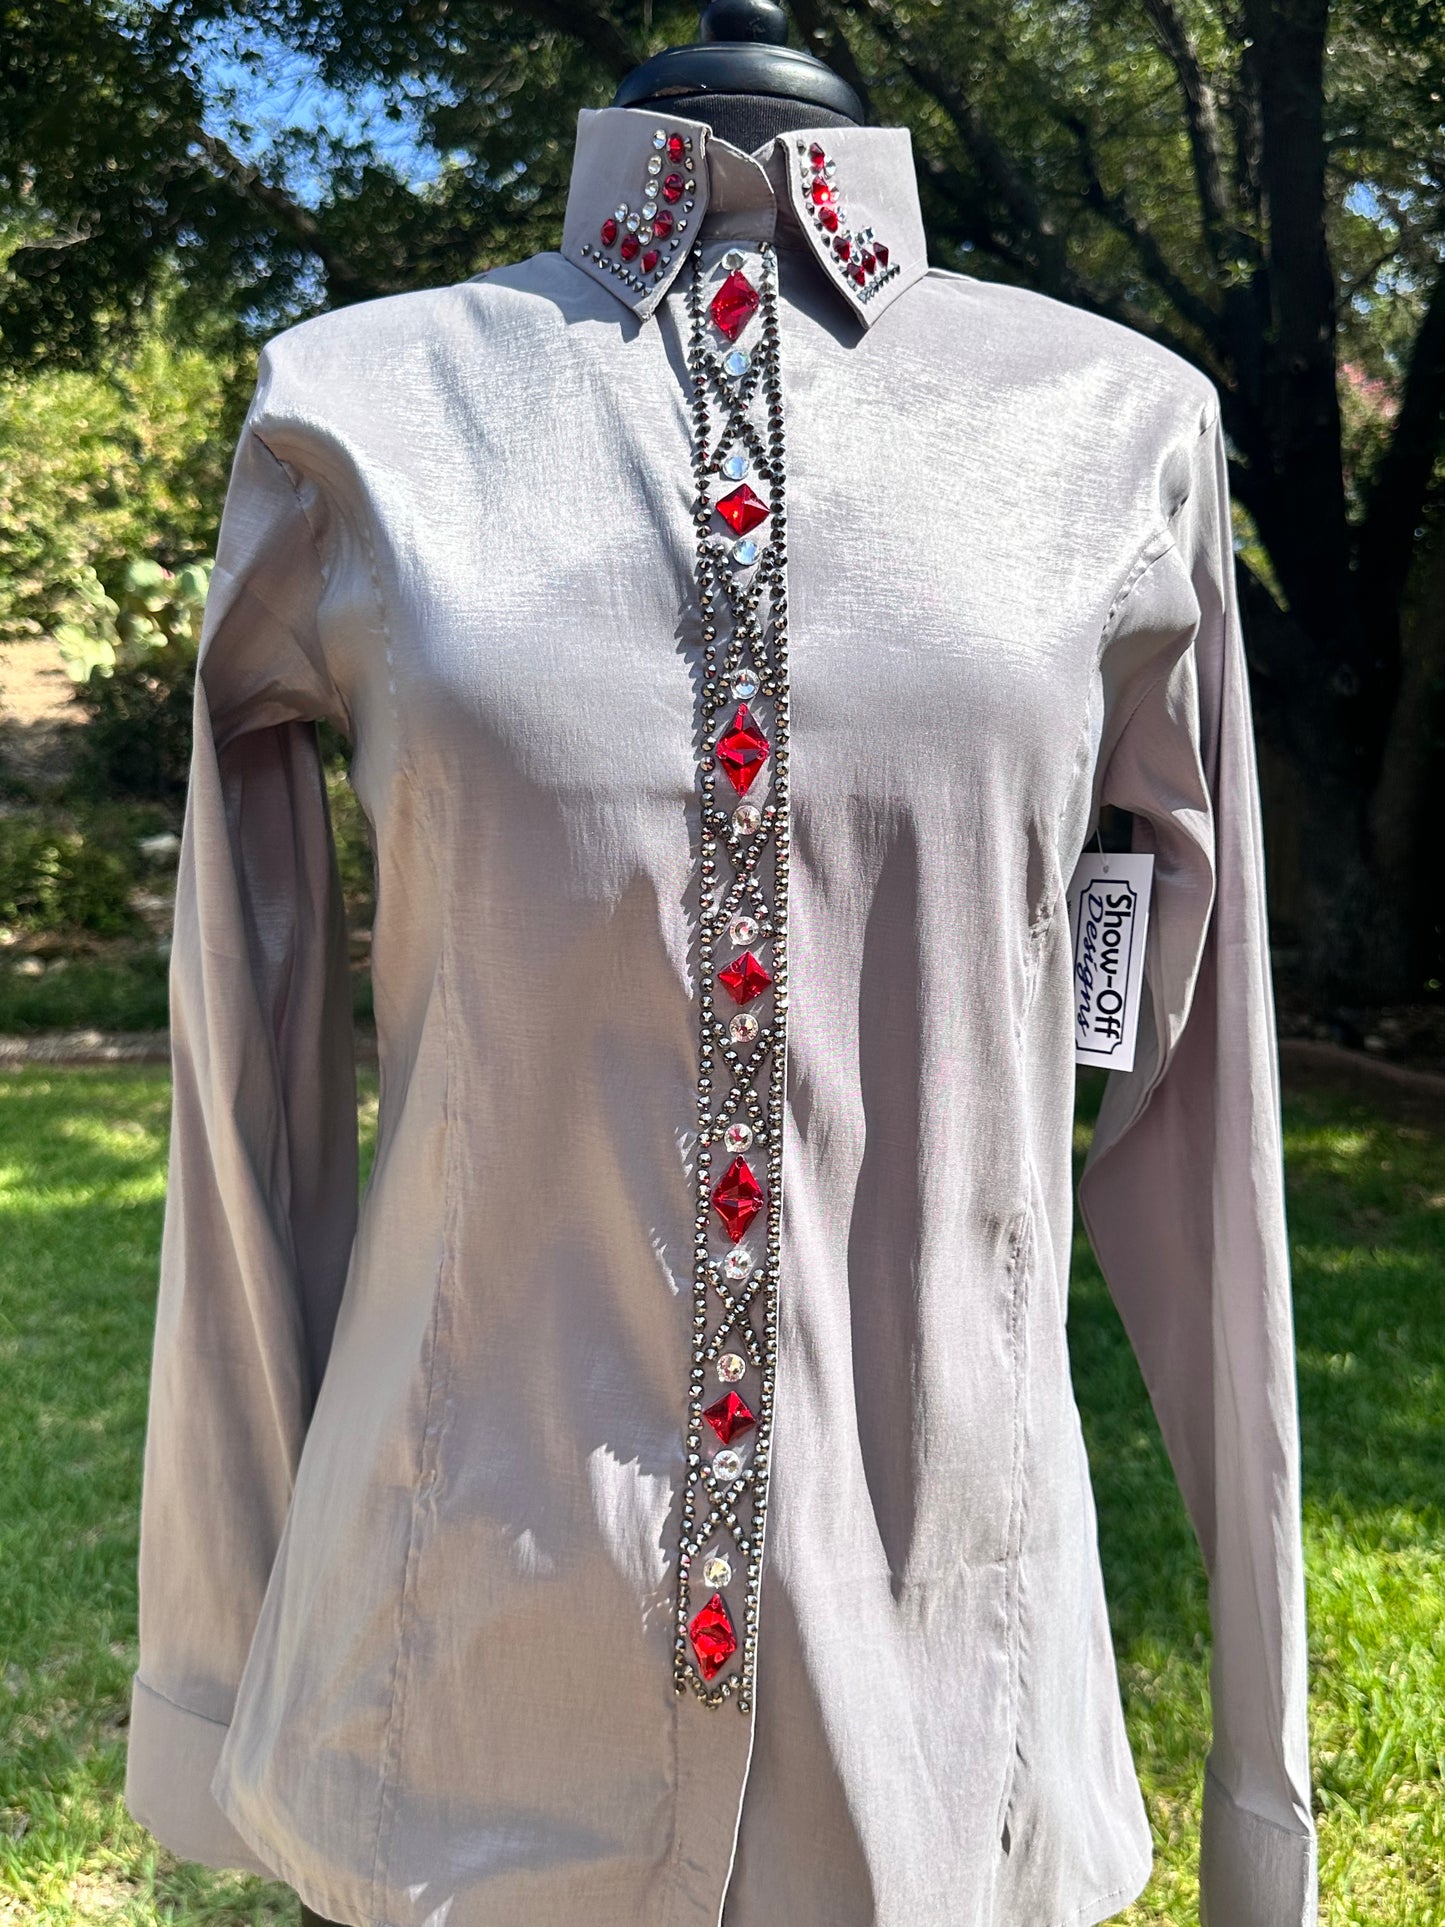 Size Large day shirt stretch taffeta silver and red hidden zipper